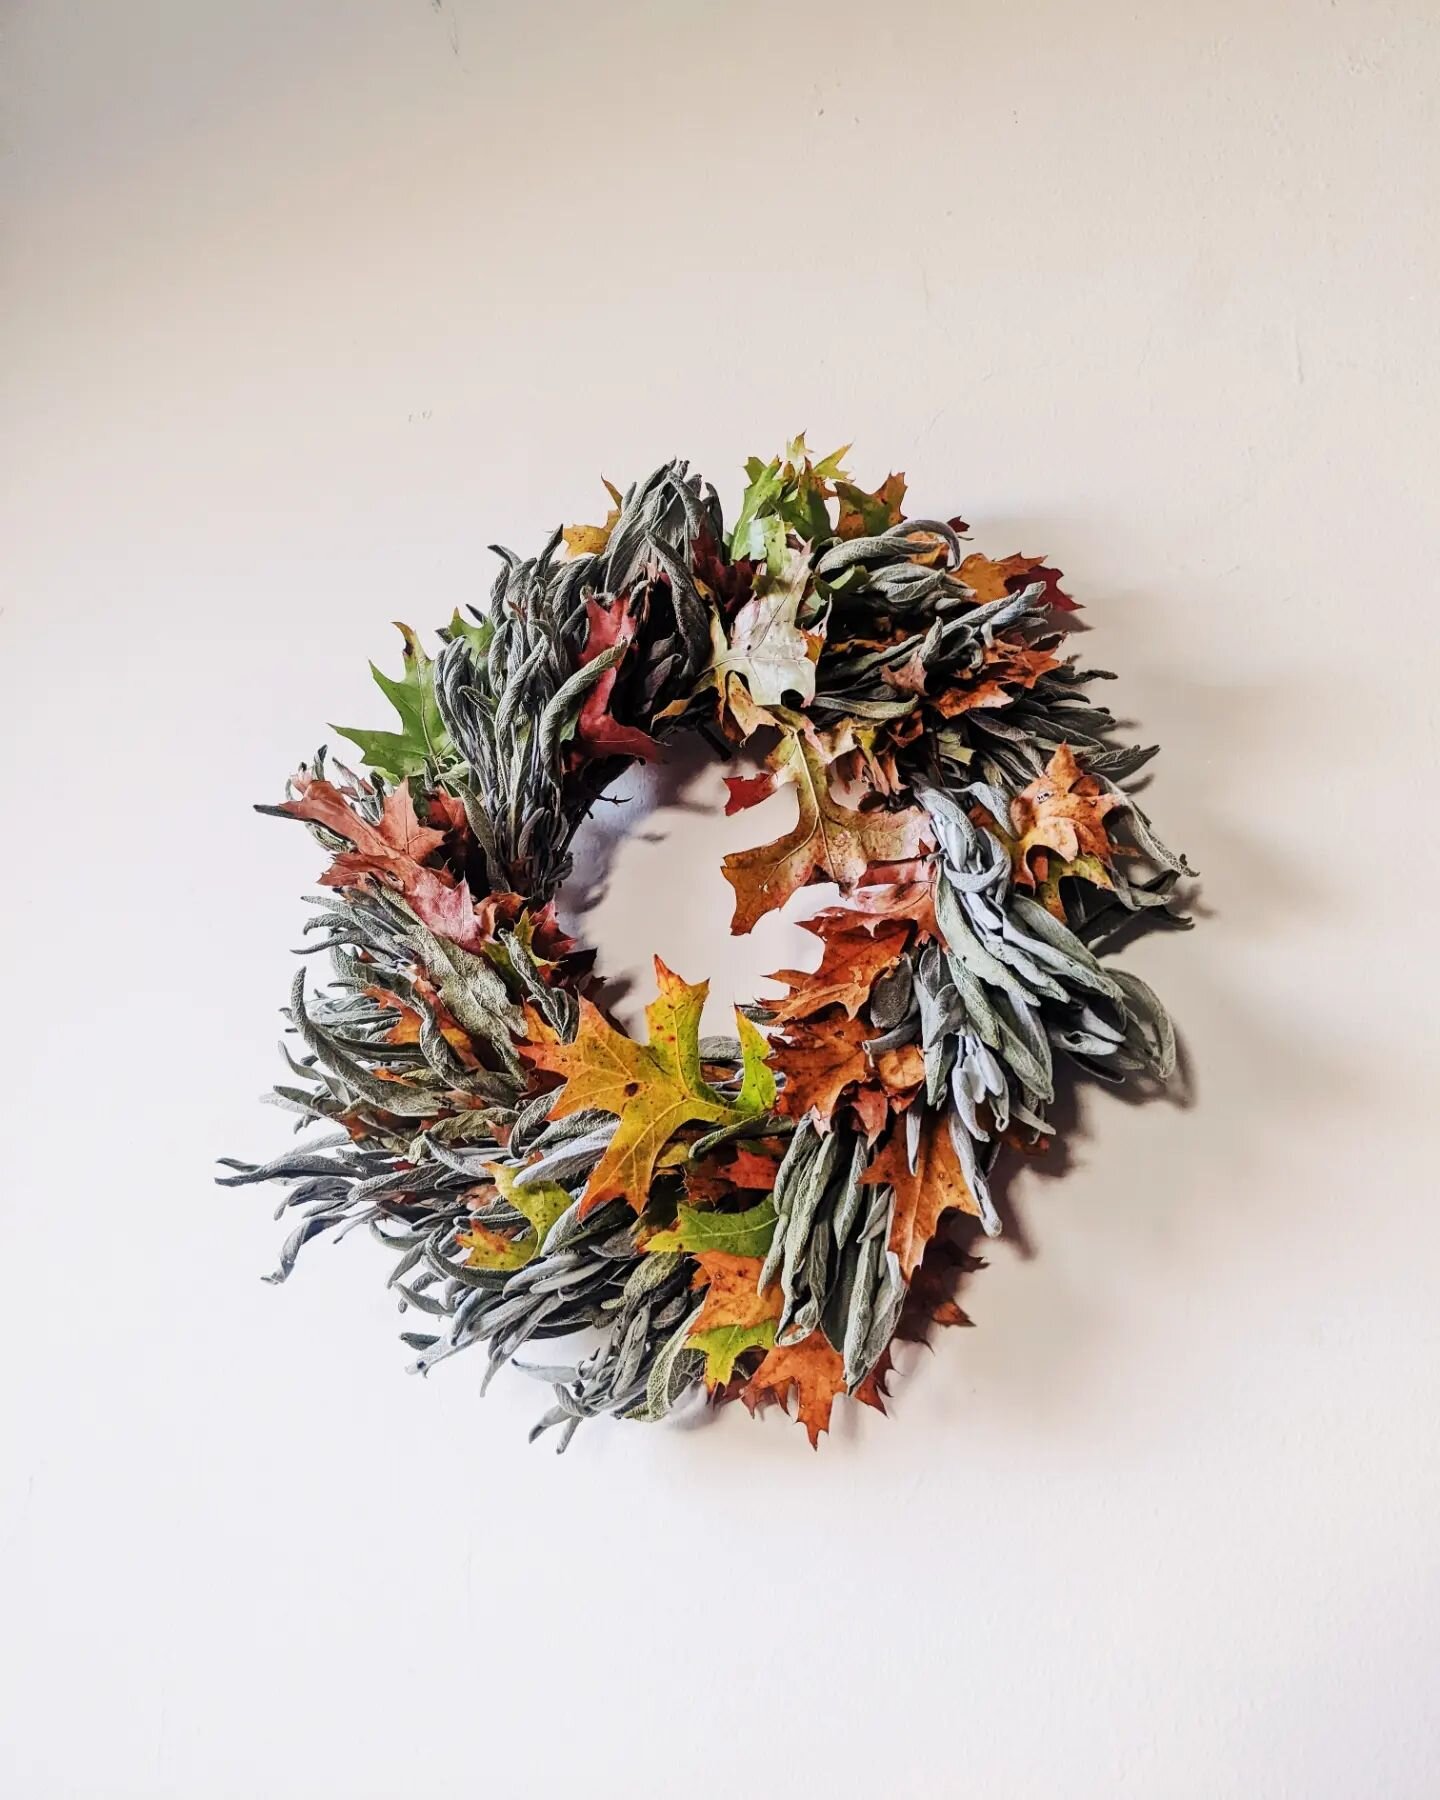 IIIIIIT'S TIIIIIME!!!

You've been asking!

🔽🔽🔽🔽🔽🔽
Wreath shop is online now! 🧑&zwj;💻
🔼🔼🔼🔼🔼🔼

Tons of styles being uploaded all the time ✨ most are uniquely one of a kind! Find your favorite 💕

New this year: Dried Herb Wreaths (featur